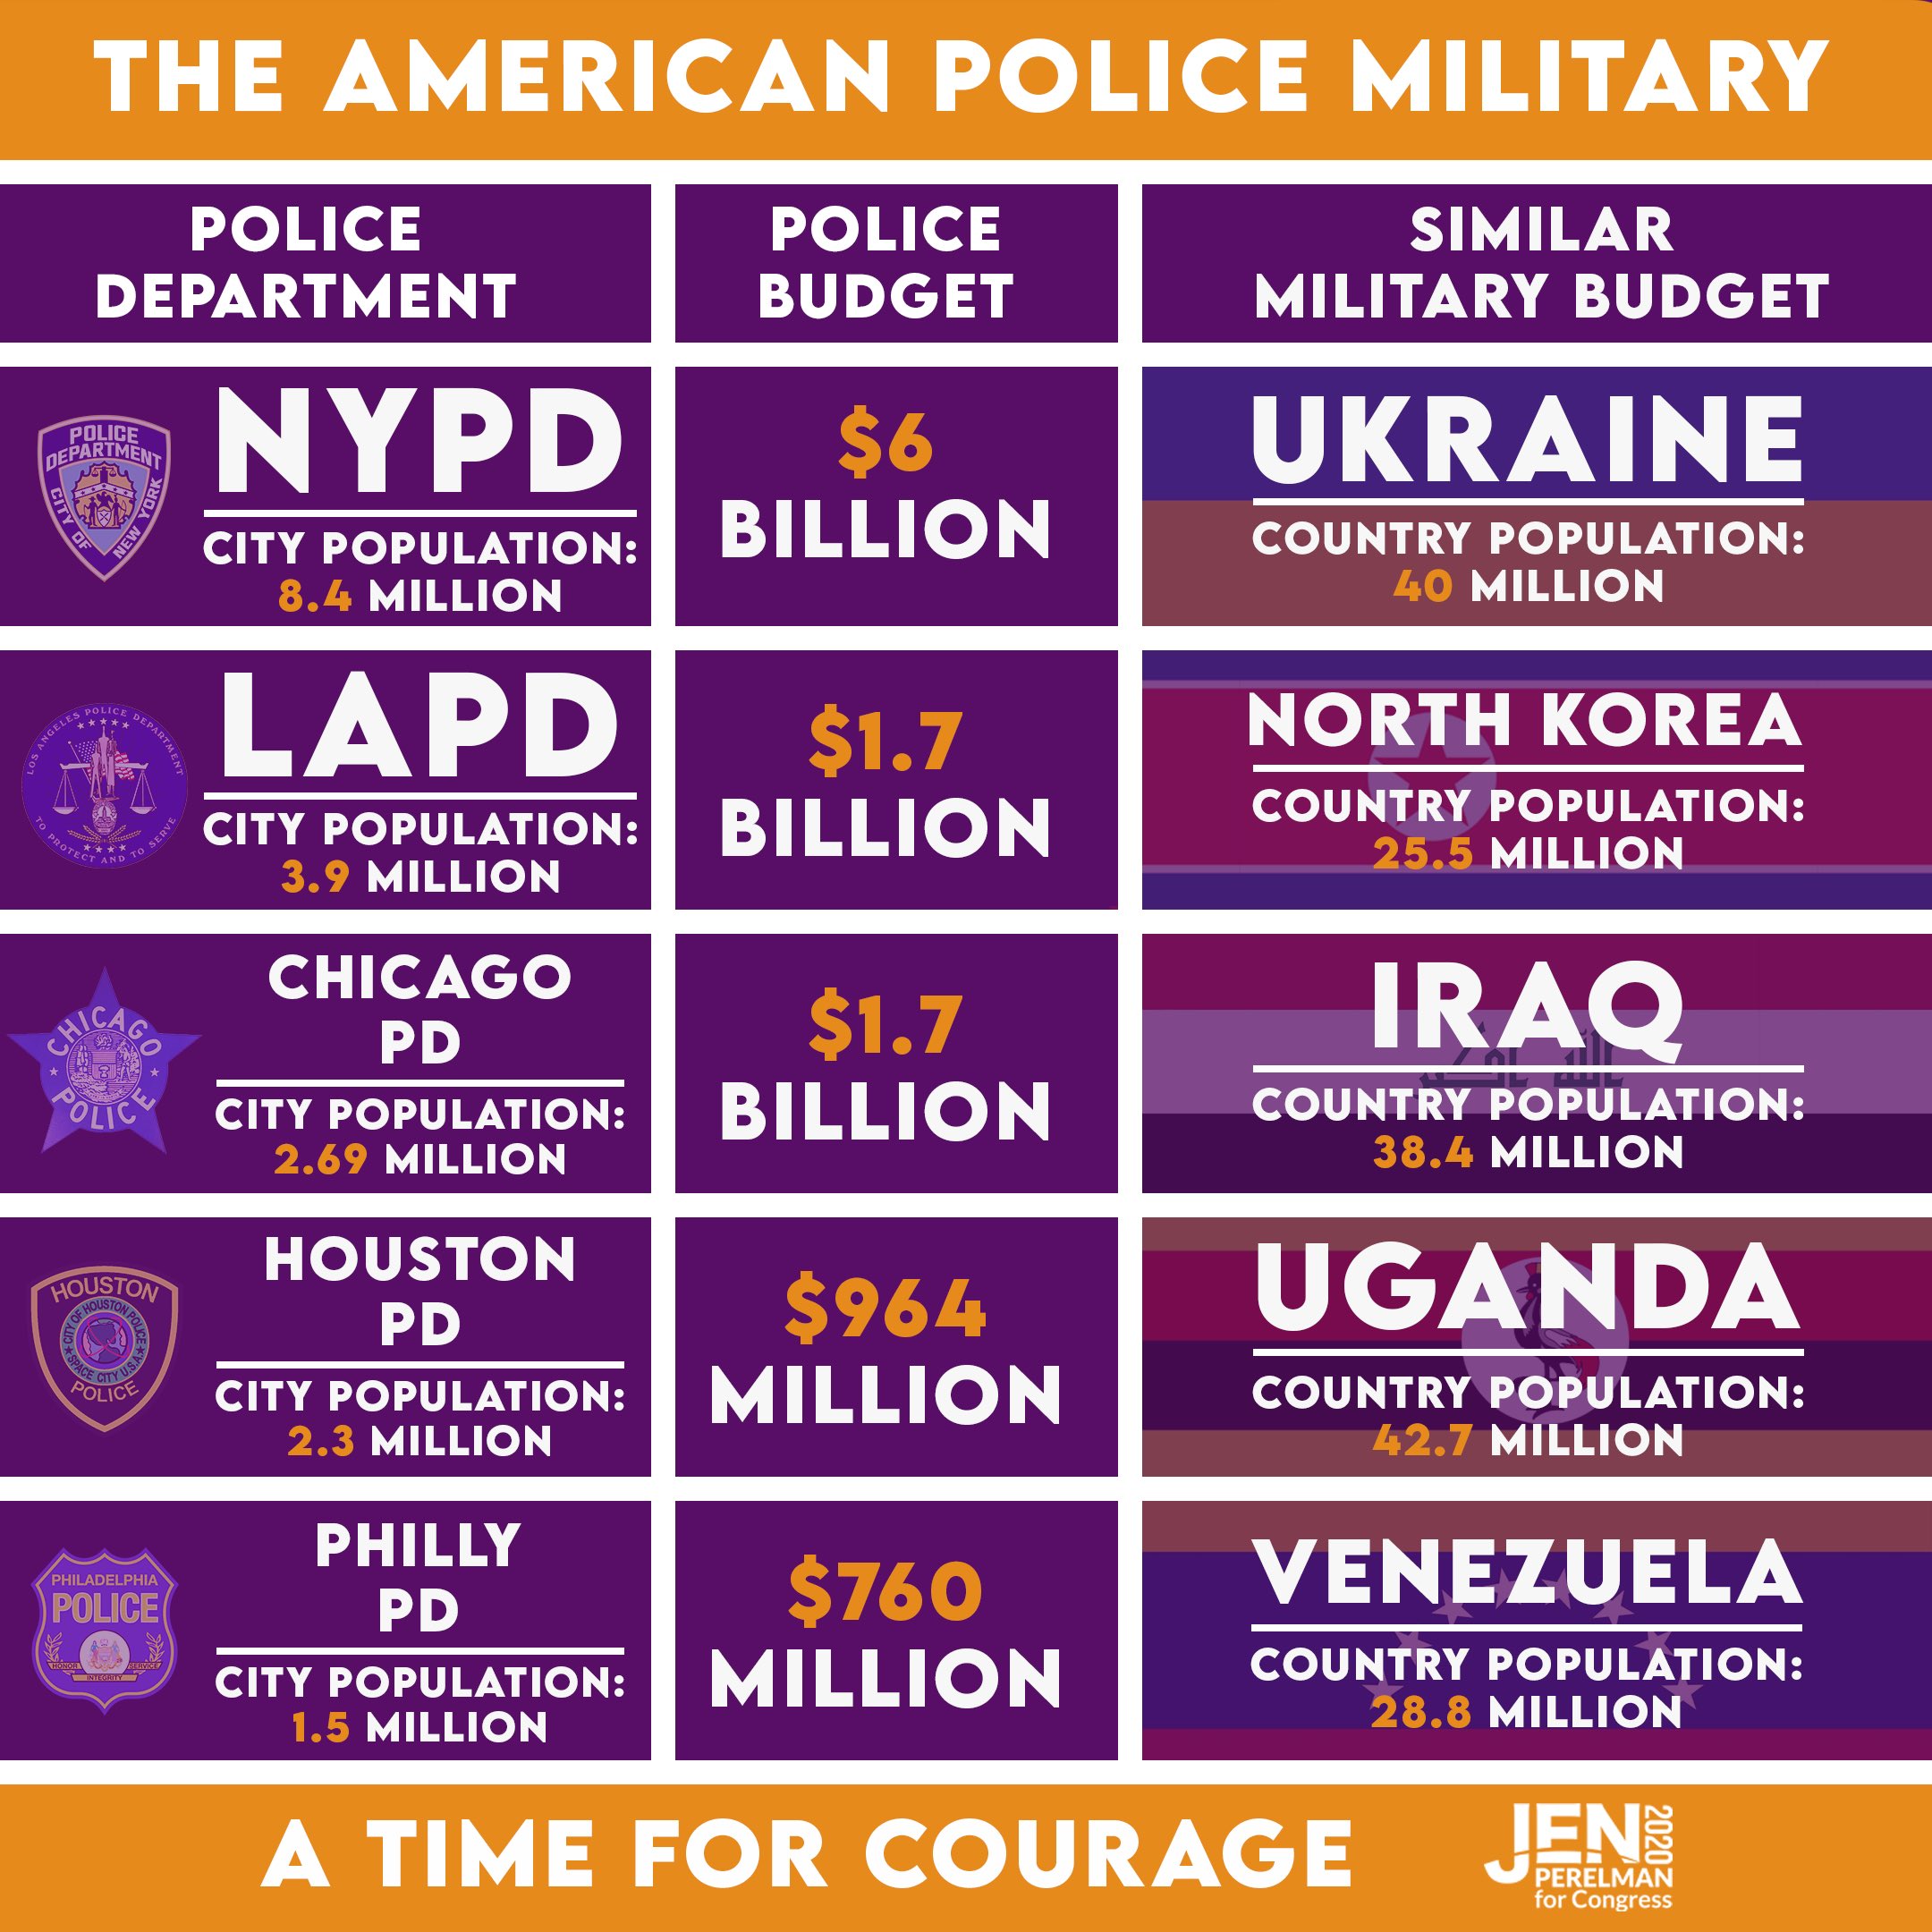 equates city police budgets with military budgets of other countries